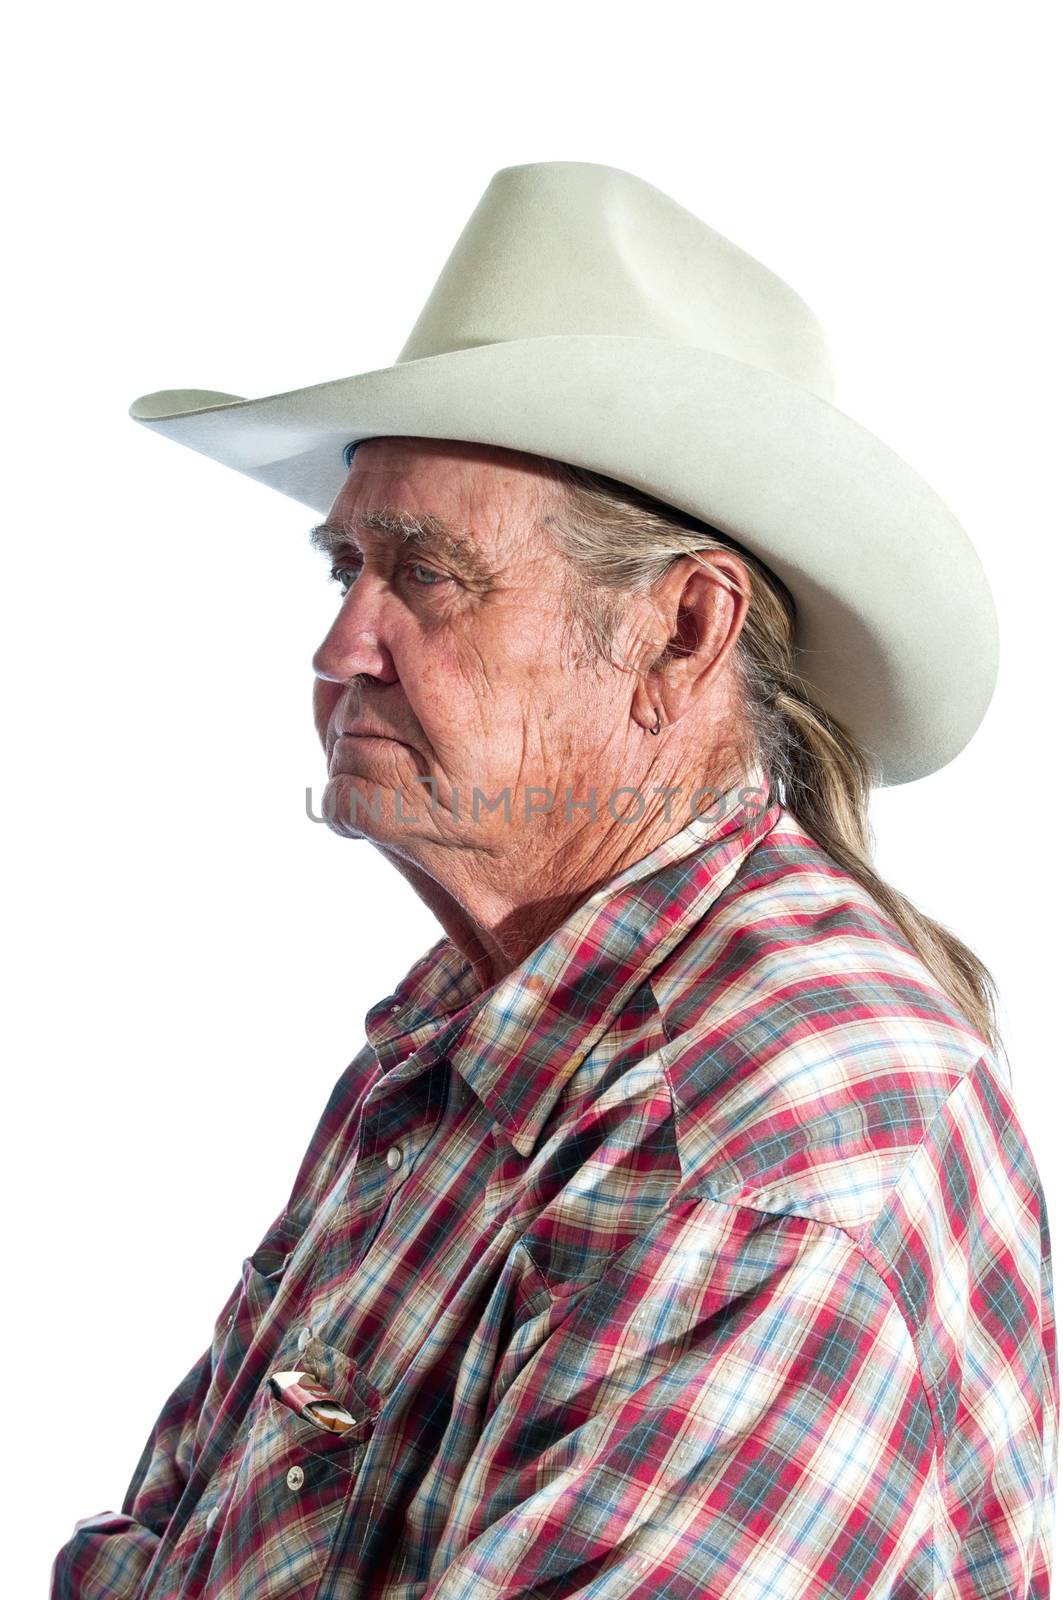 Wisdom written on his face, a retired cowboy pauses for a portrait